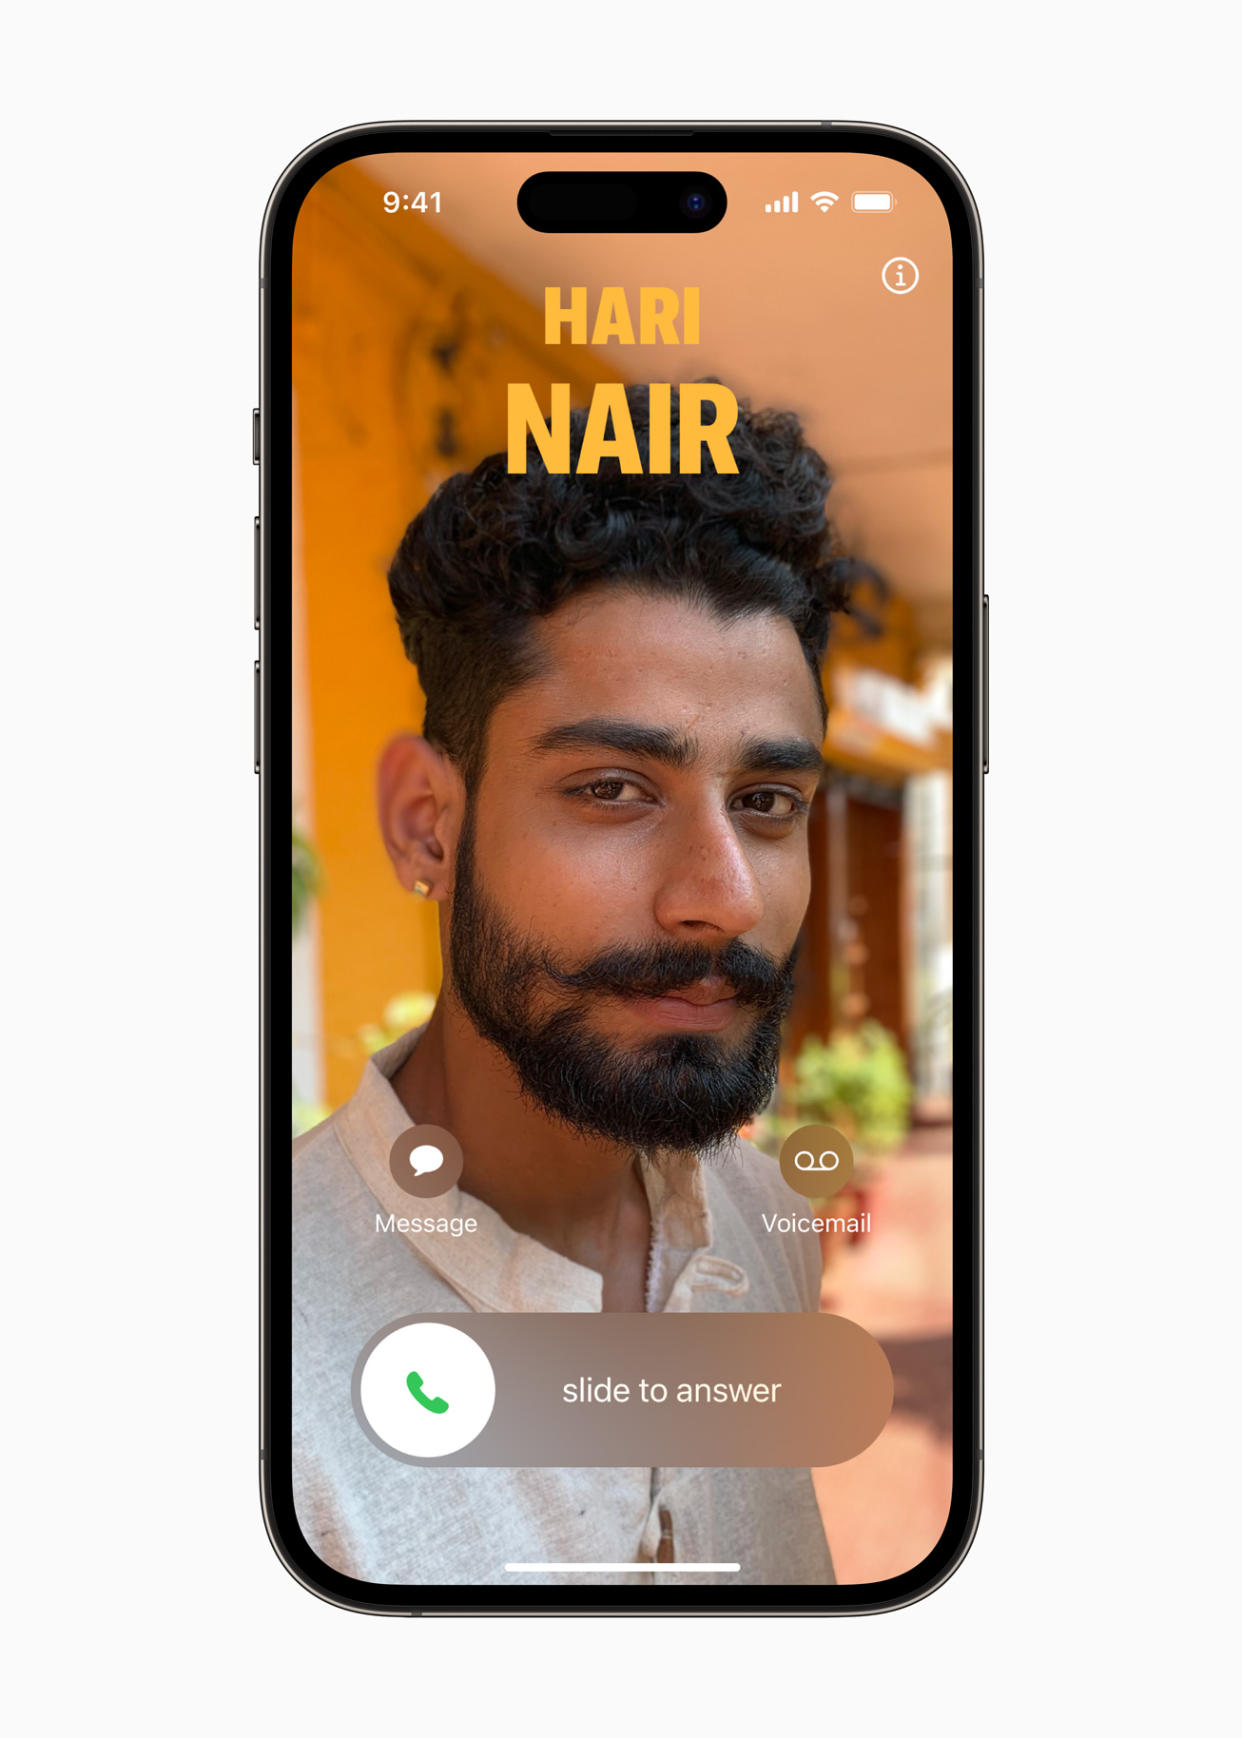 Apple is adding Contact Posters to help identify you when you call friends and family. (Image: Apple)